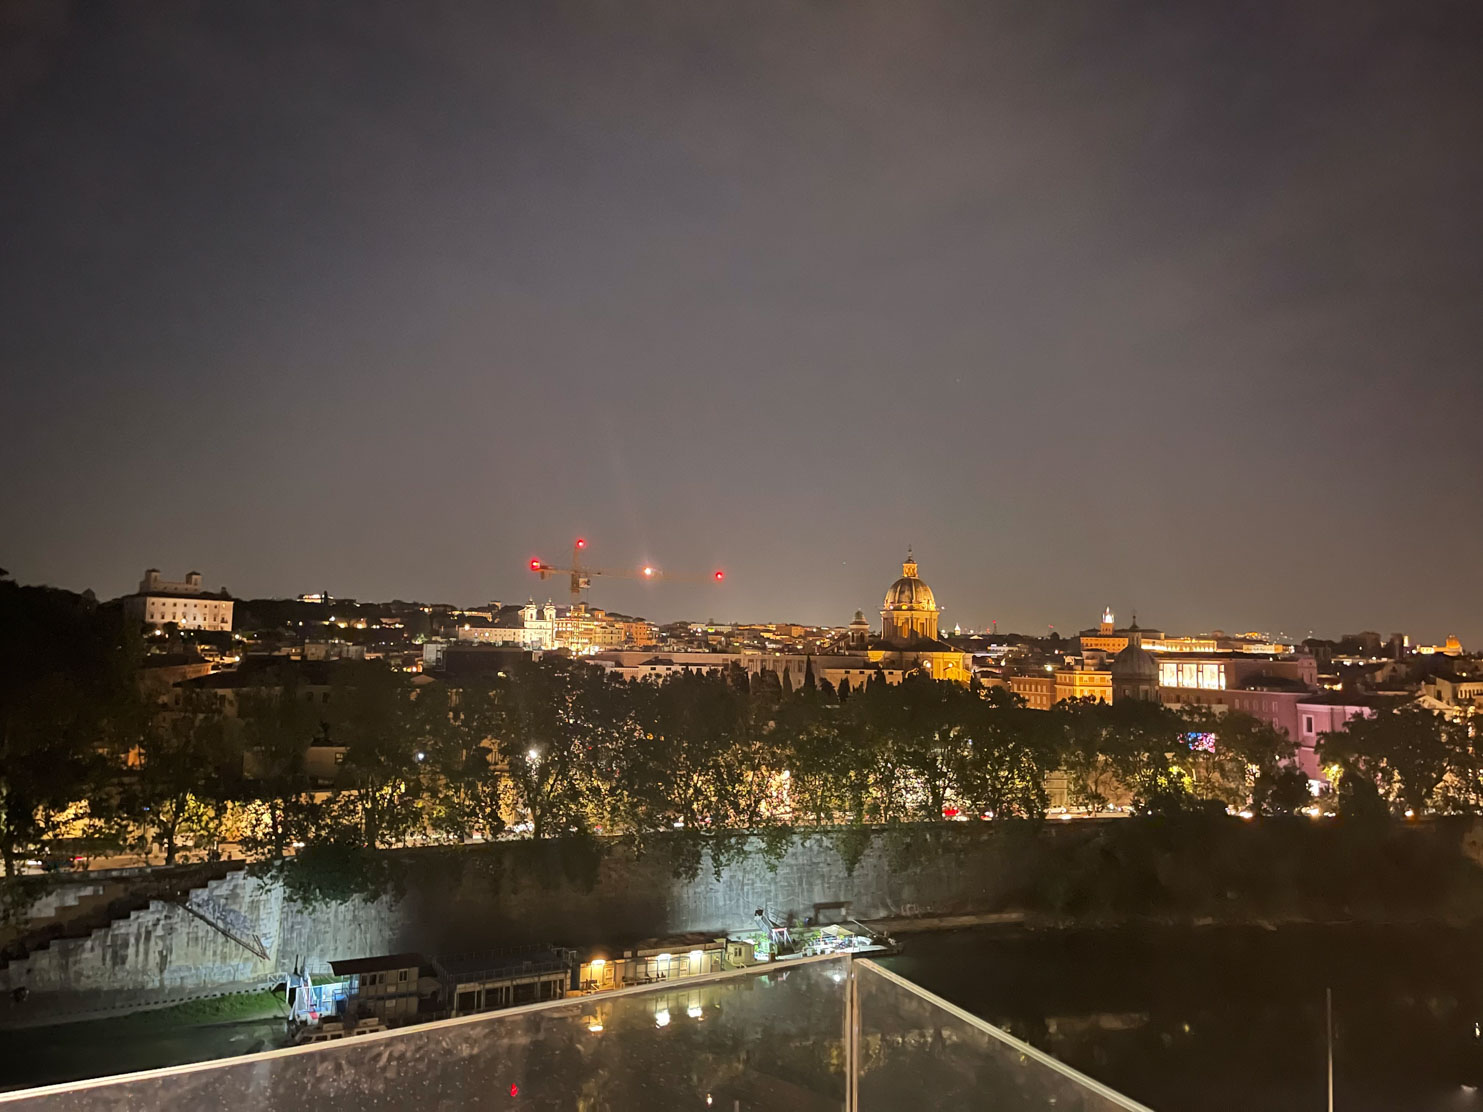 The First Musica The rooftop bar Alto is a vibe and has 180 degrees views of the Eternal City and the Tiber River